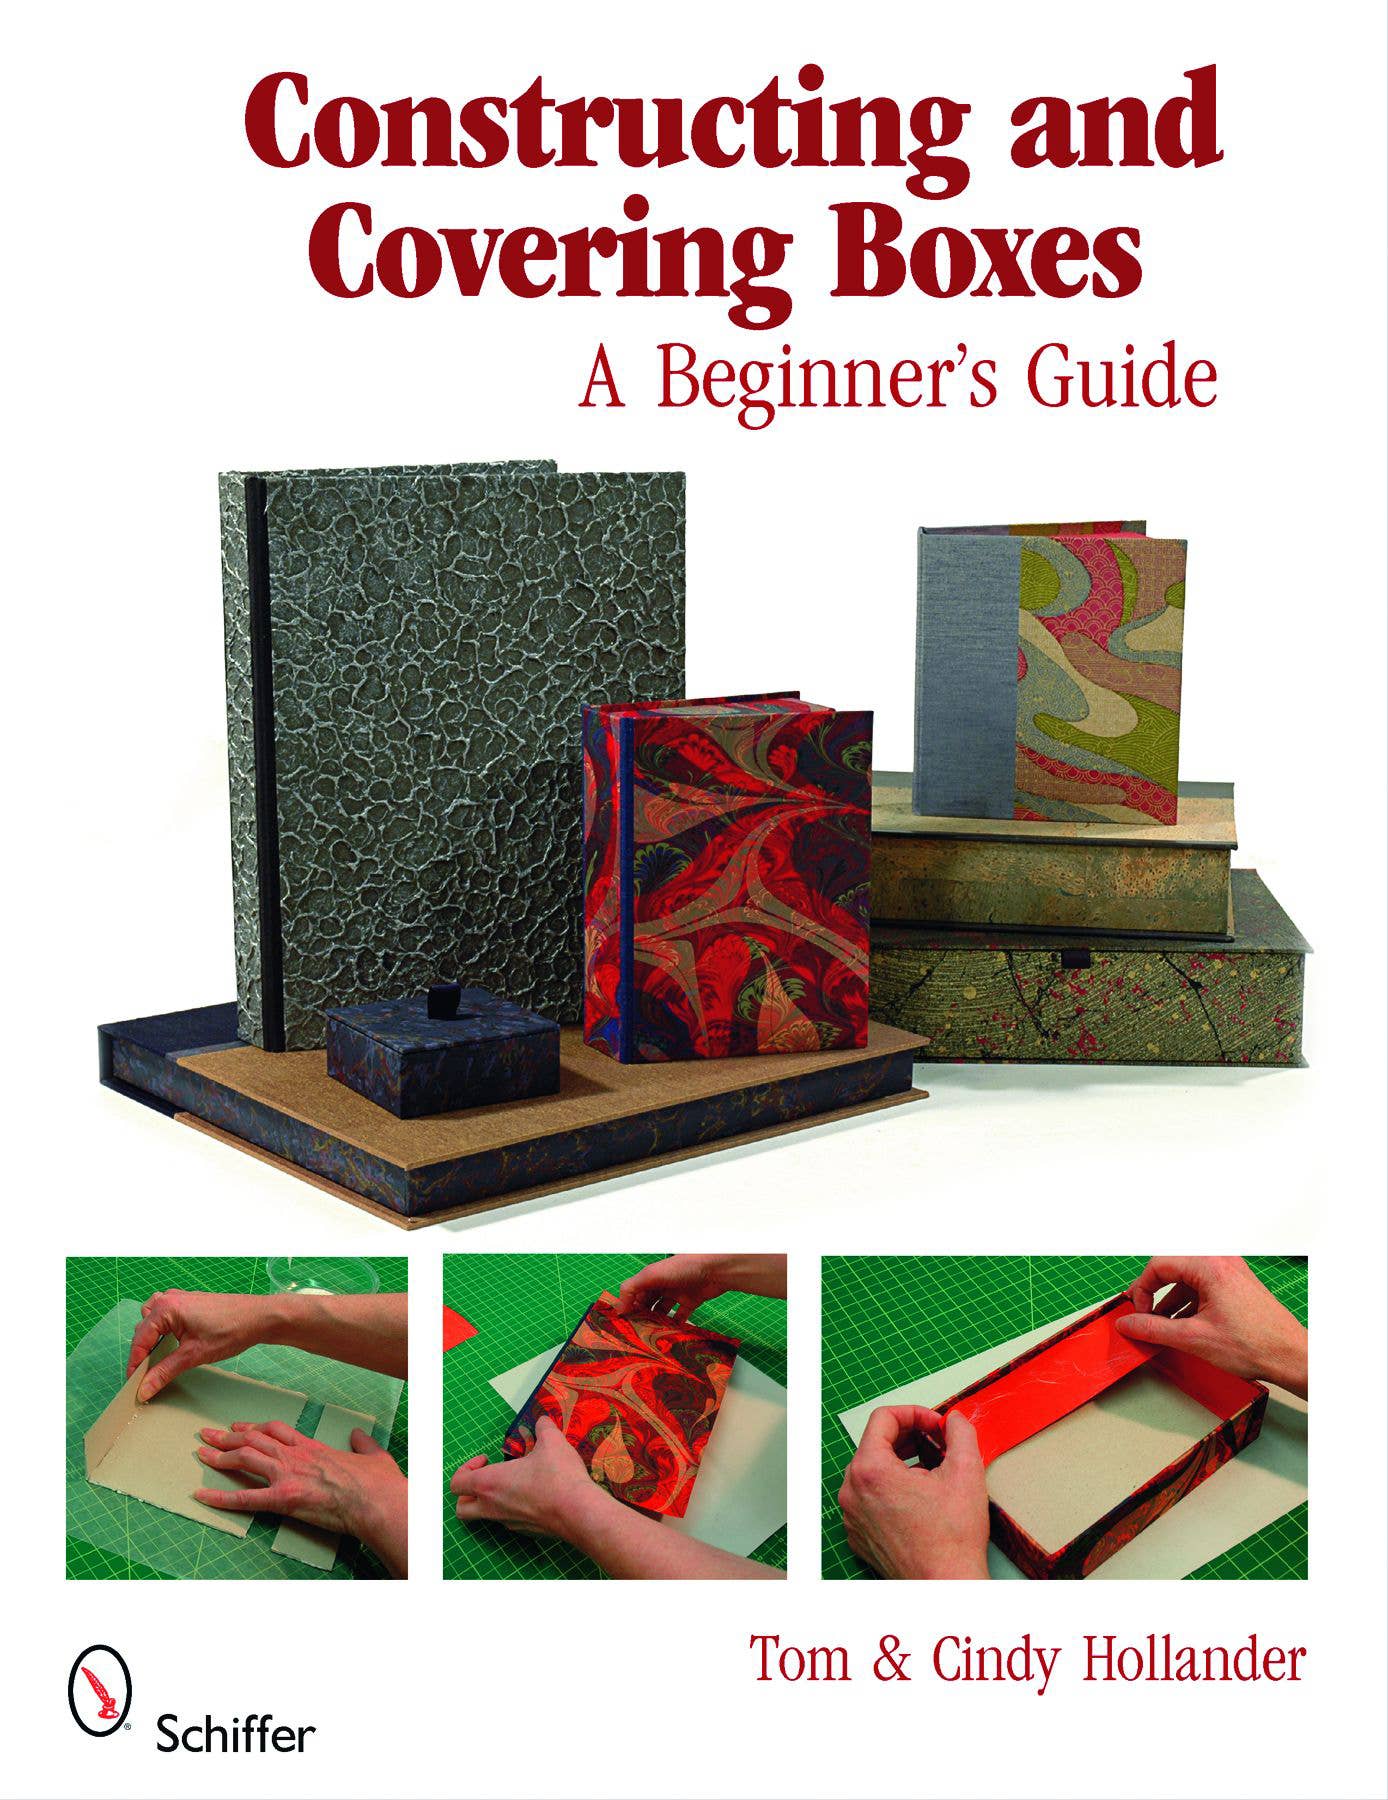 Constructing and Covering Boxes